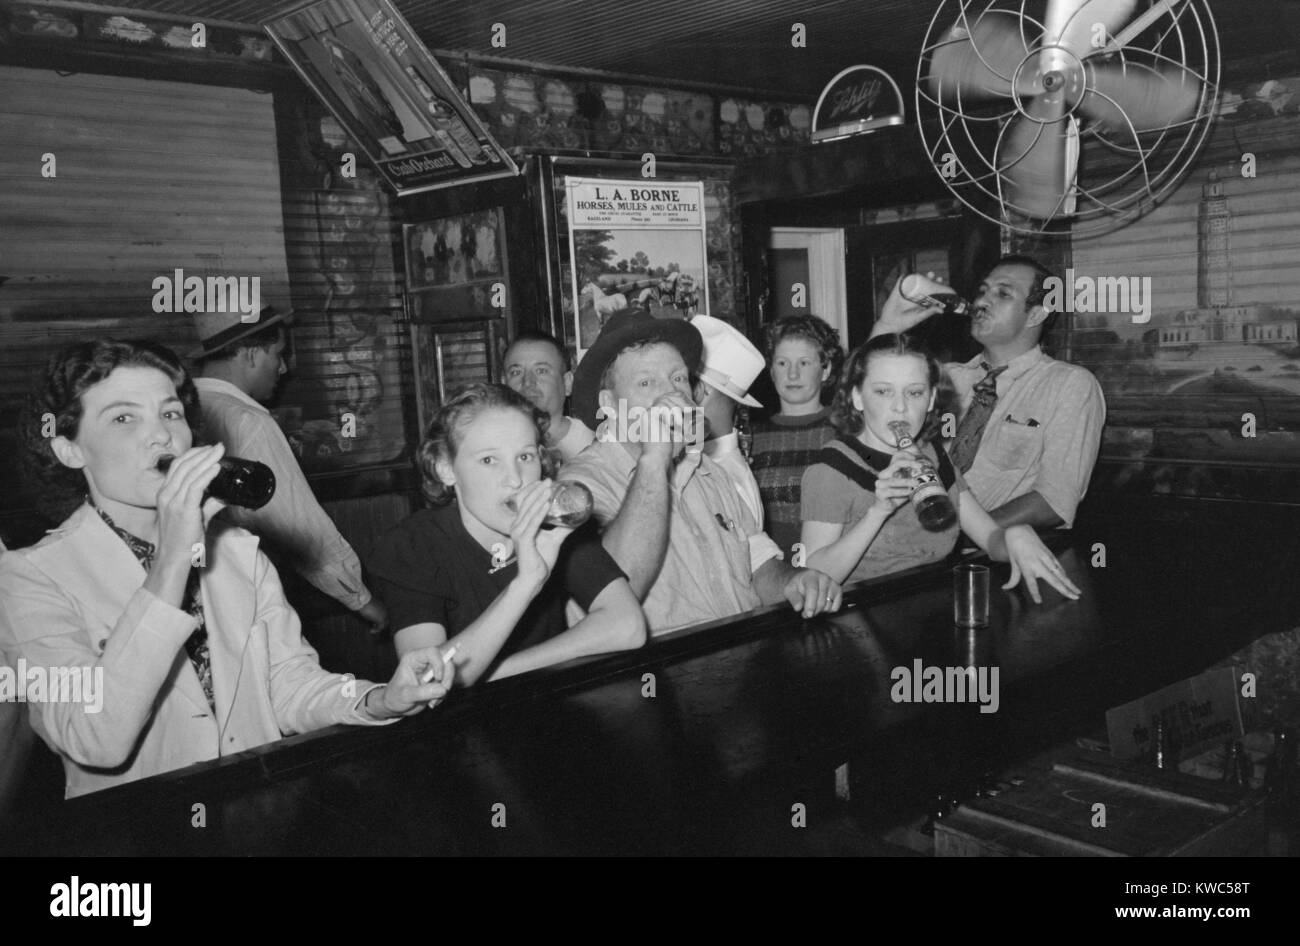 Men and women drinking beer in a bar on crab boil night, in Raceland, Louisiana. Sept. 1938 photo by Russell Lee. (BSLOC 2015 14 140) Stock Photo